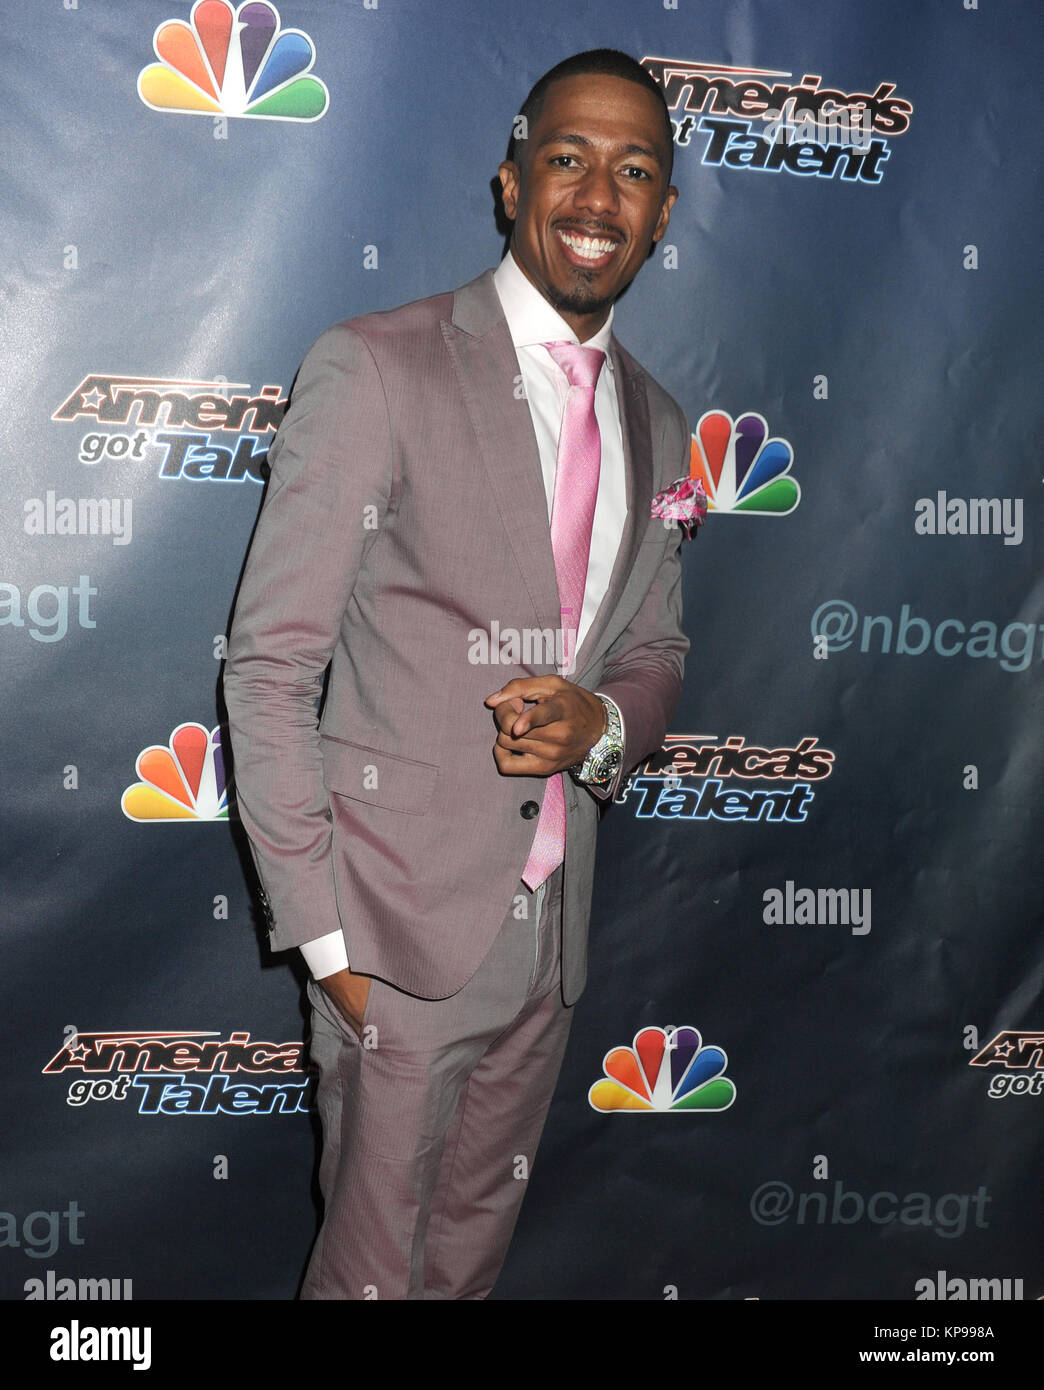 NEW YORK, NY - AUGUST 19: Nick Cannon attends 'America's Got Talent' post-show red carpet event at Radio City Music Hall on August 19, 2015 in New York City.   People:  Nick Cannon Stock Photo